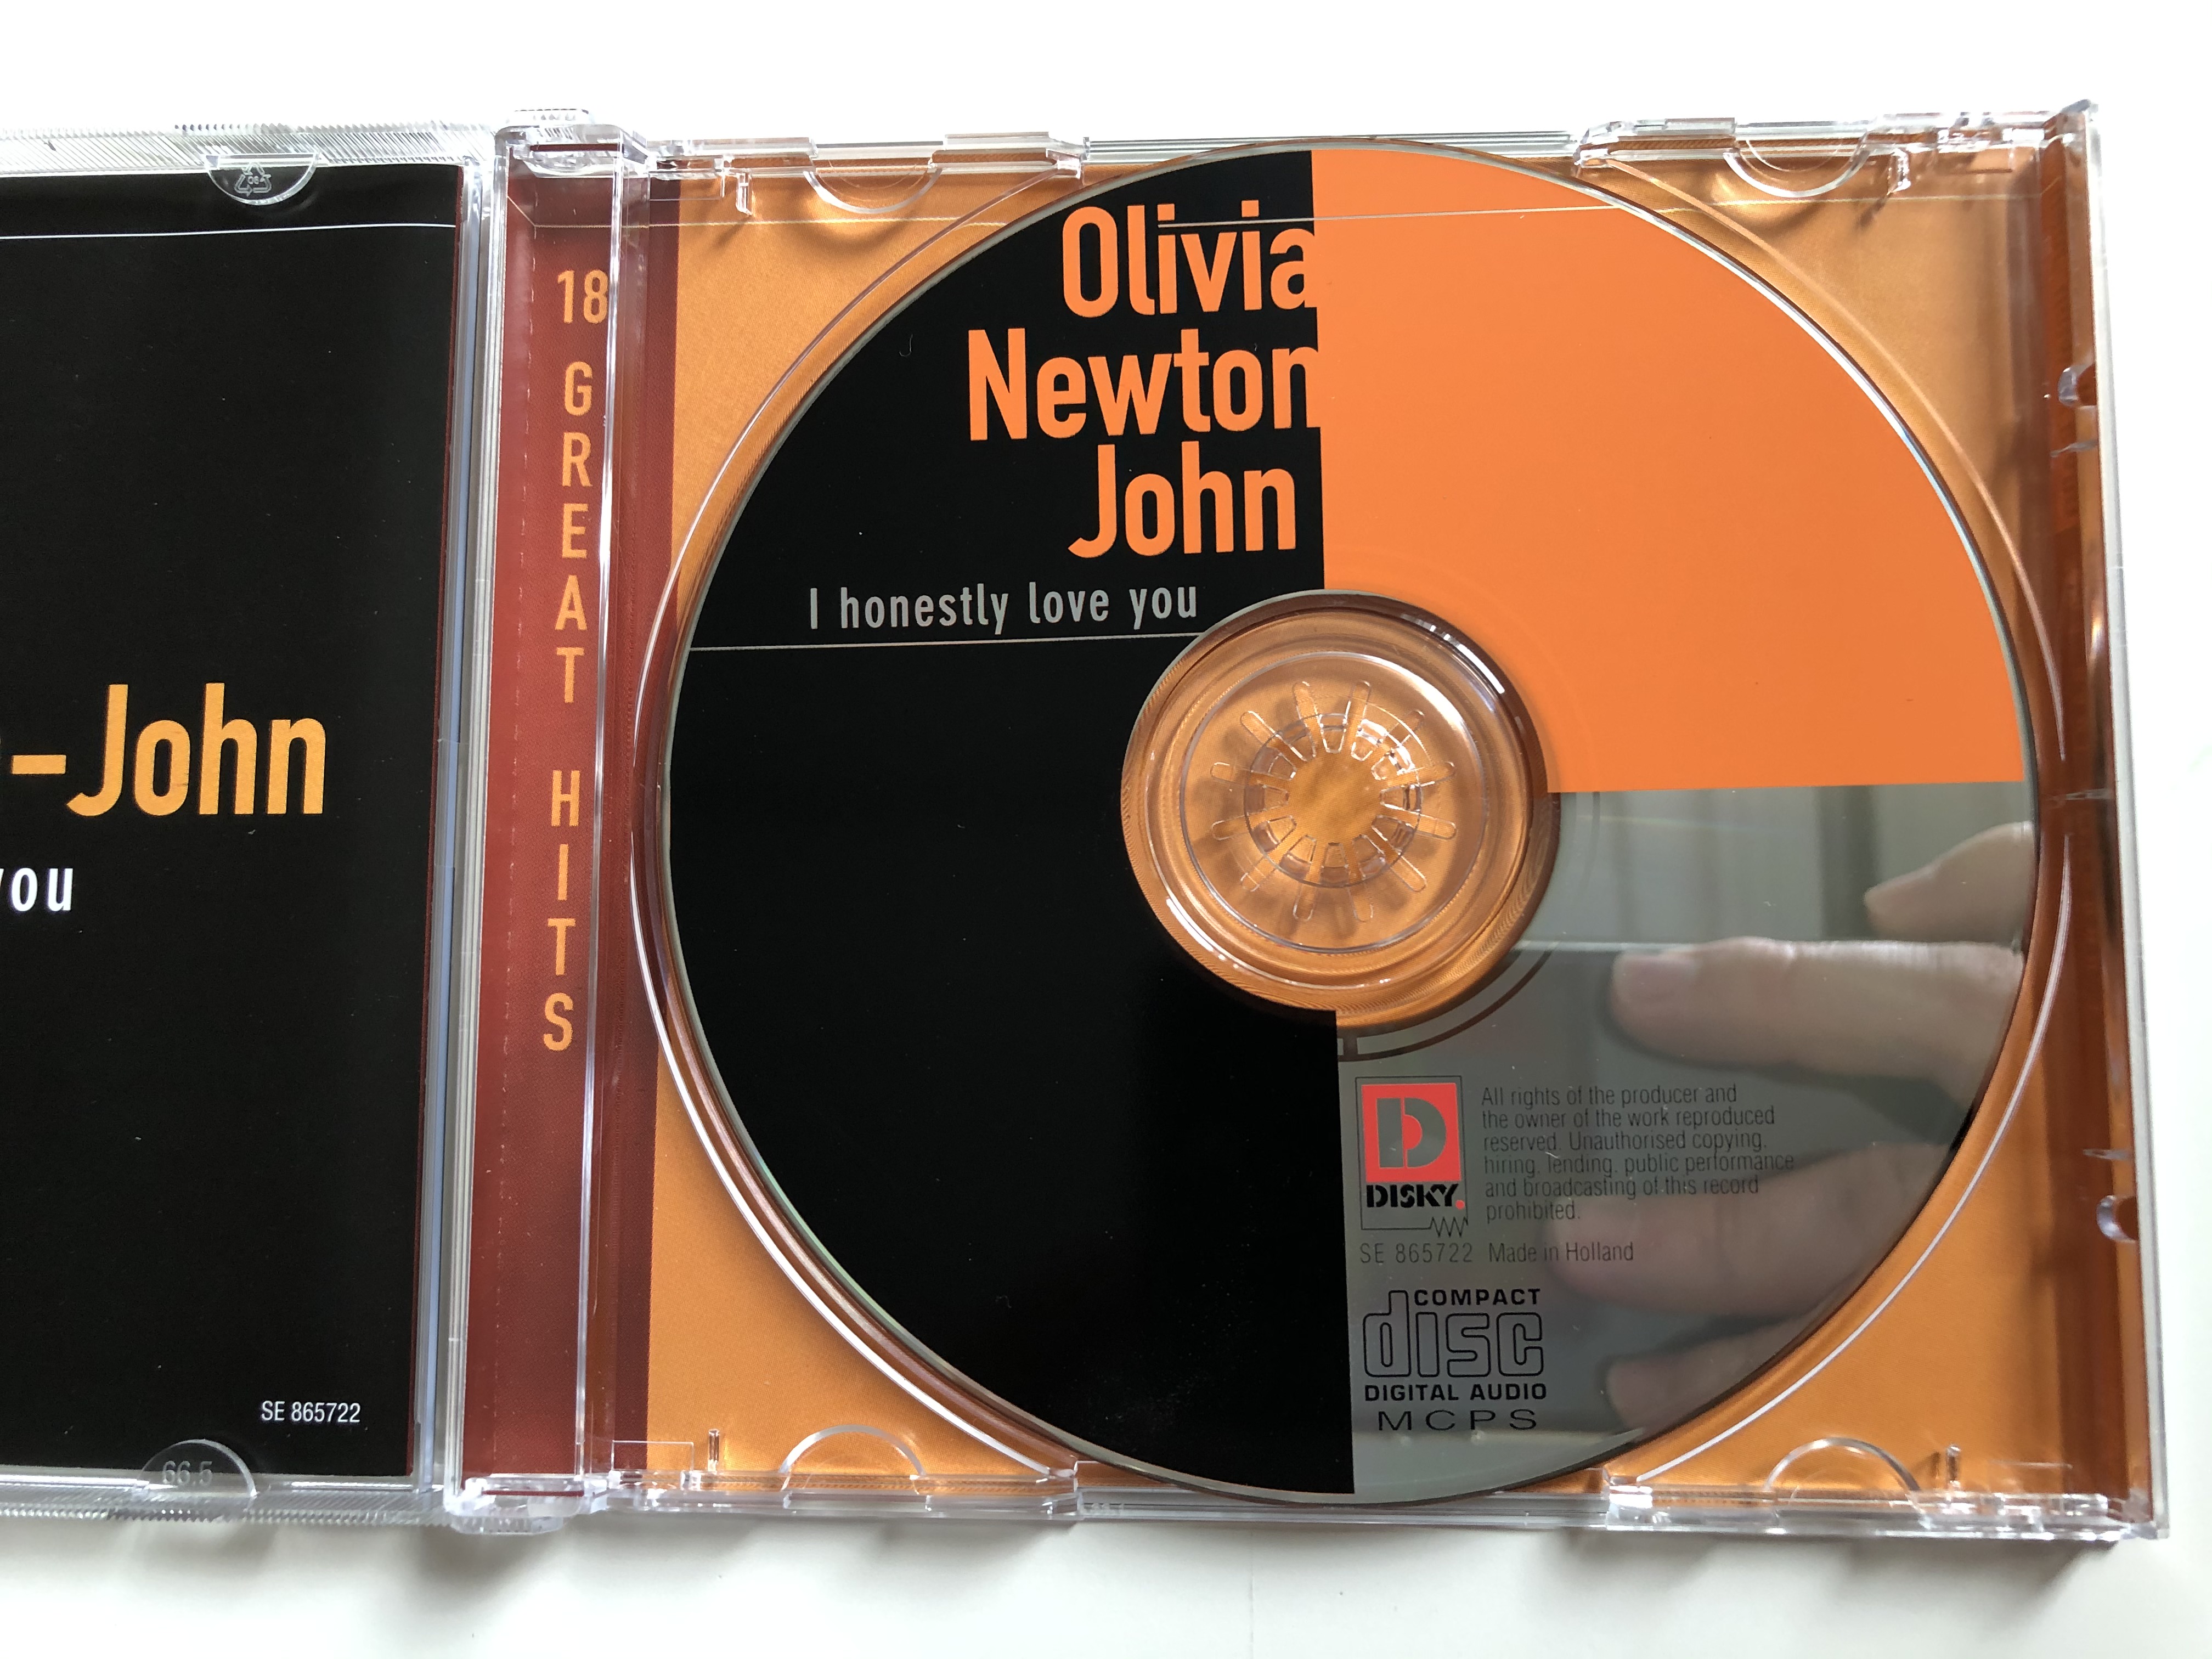 olivia-newton-john-i-honestly-love-you-18-great-hits-original-hit-recordings-if-not-for-you-banks-of-the-ohio-amoureuse-disky-audio-cd-1996-se-865722-3-.jpg